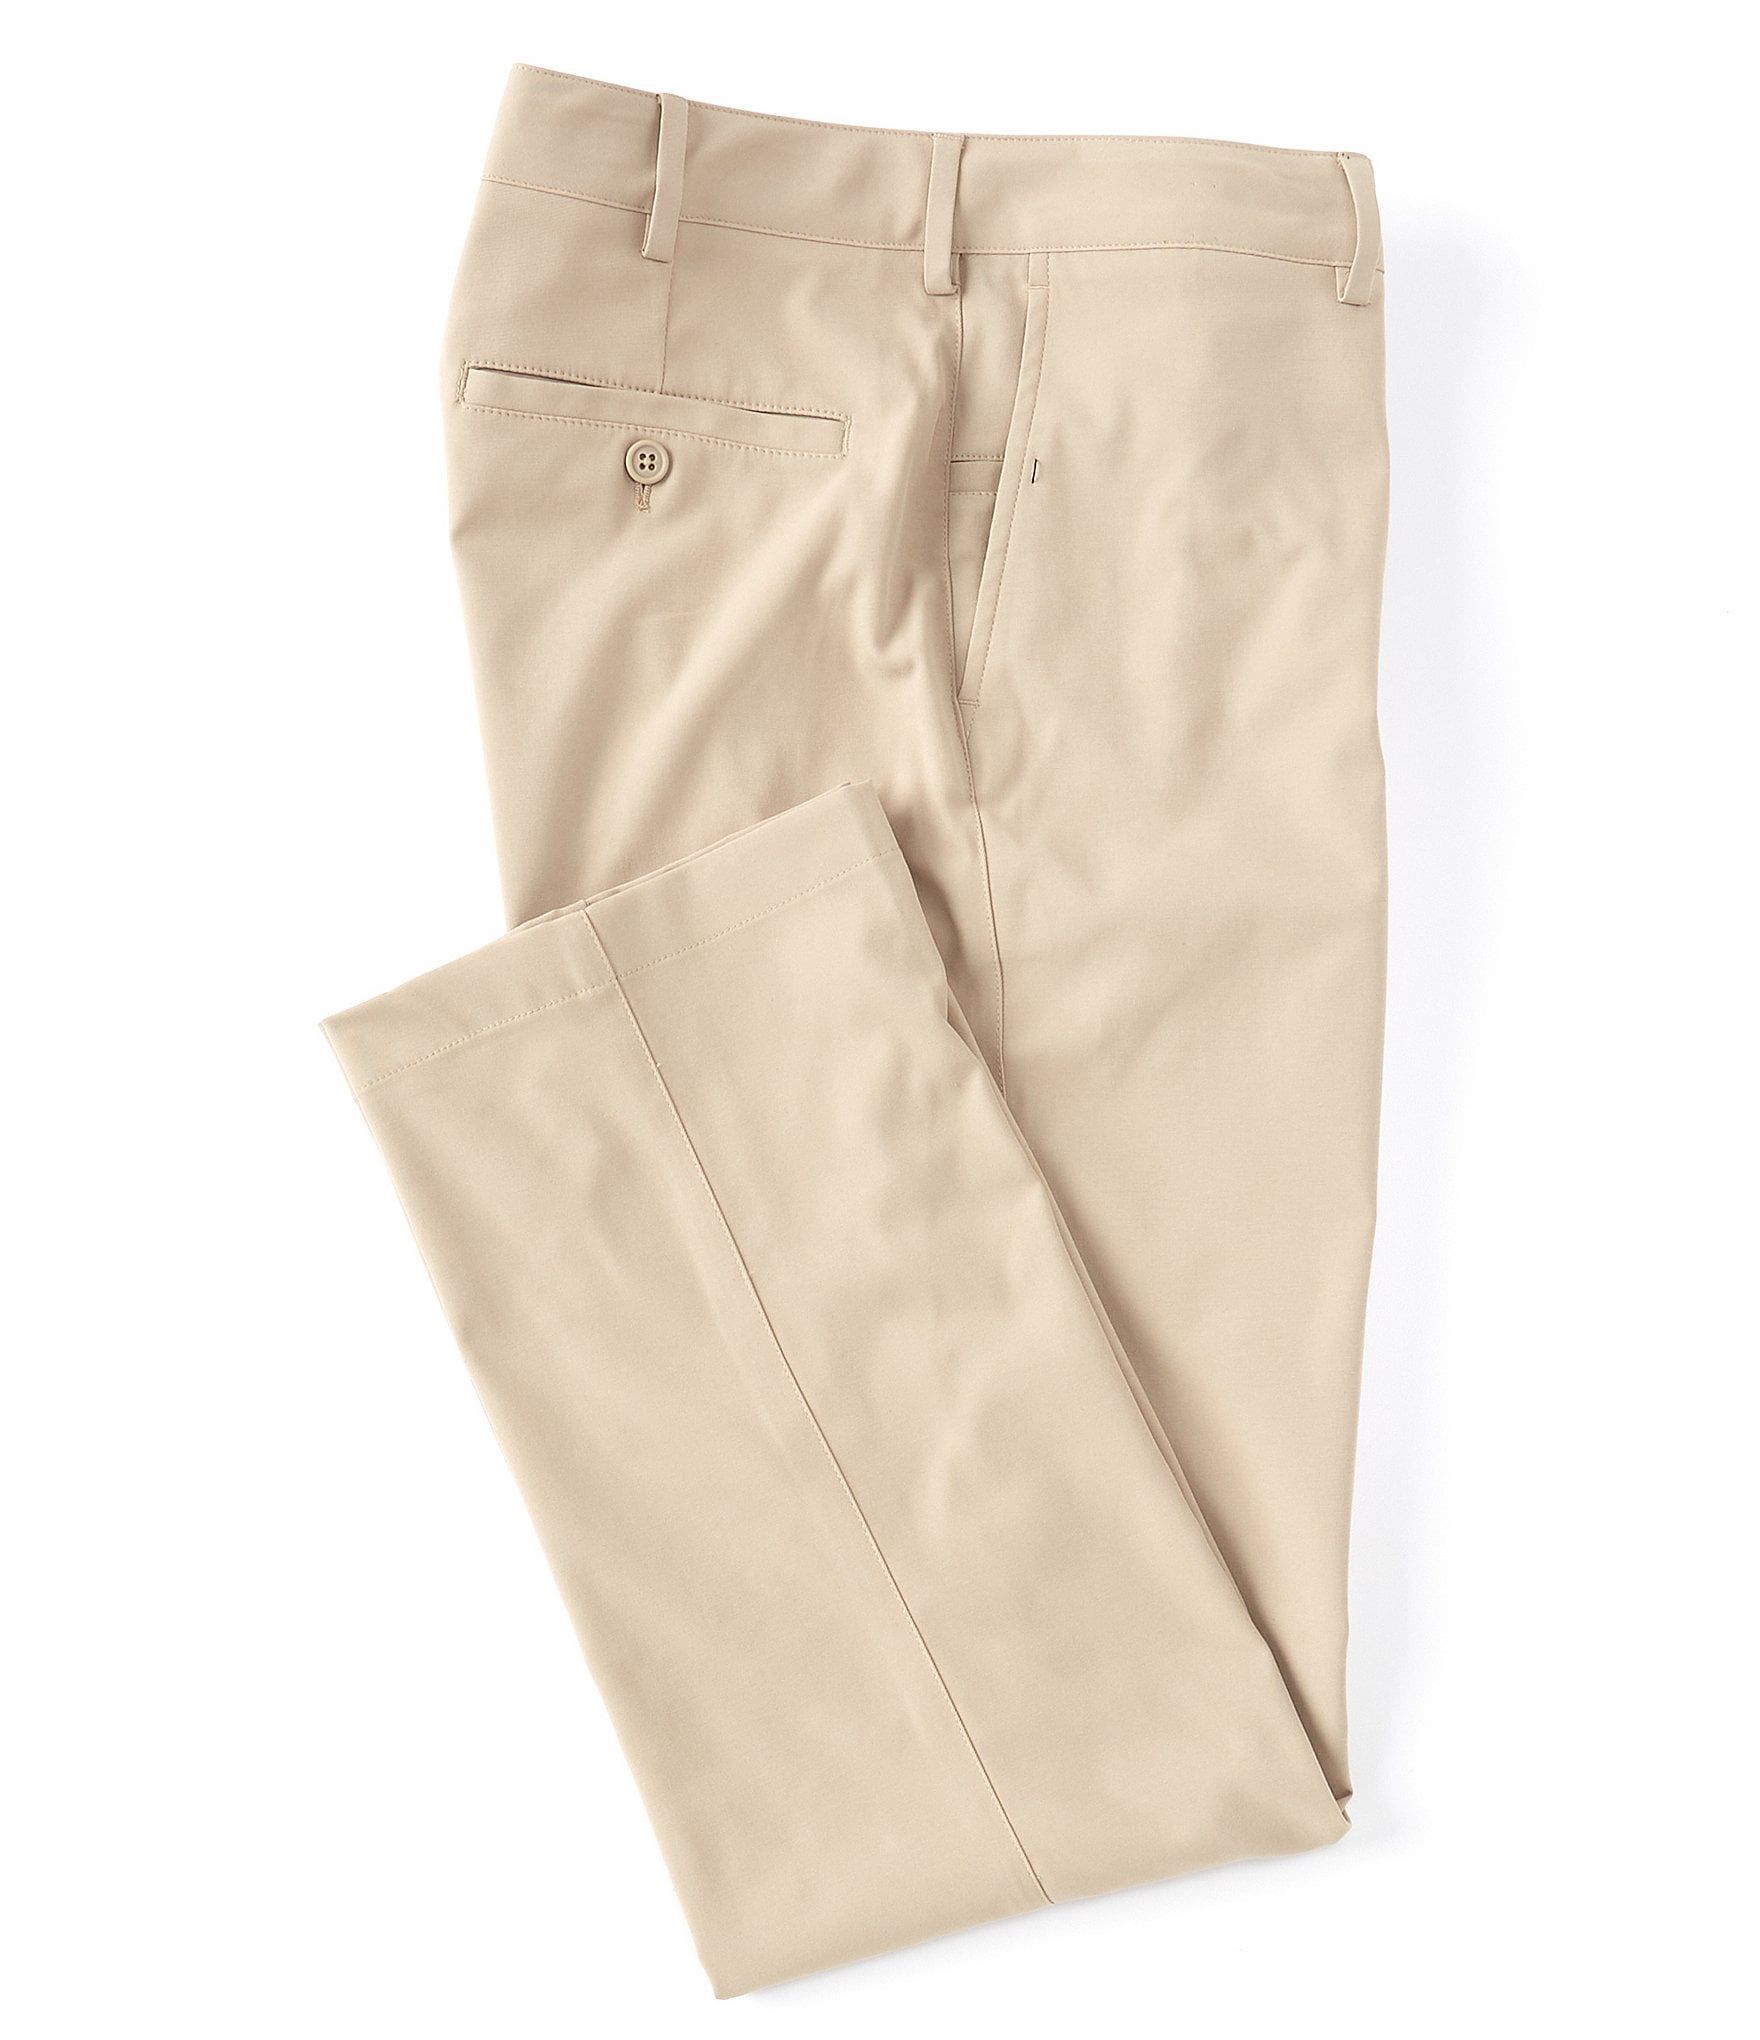 ROUNDTREE & YORKE NEW NWT KHAKI CLASSIC FIT PANTS 40 X 29 STRING BEIGE FREE S/H 